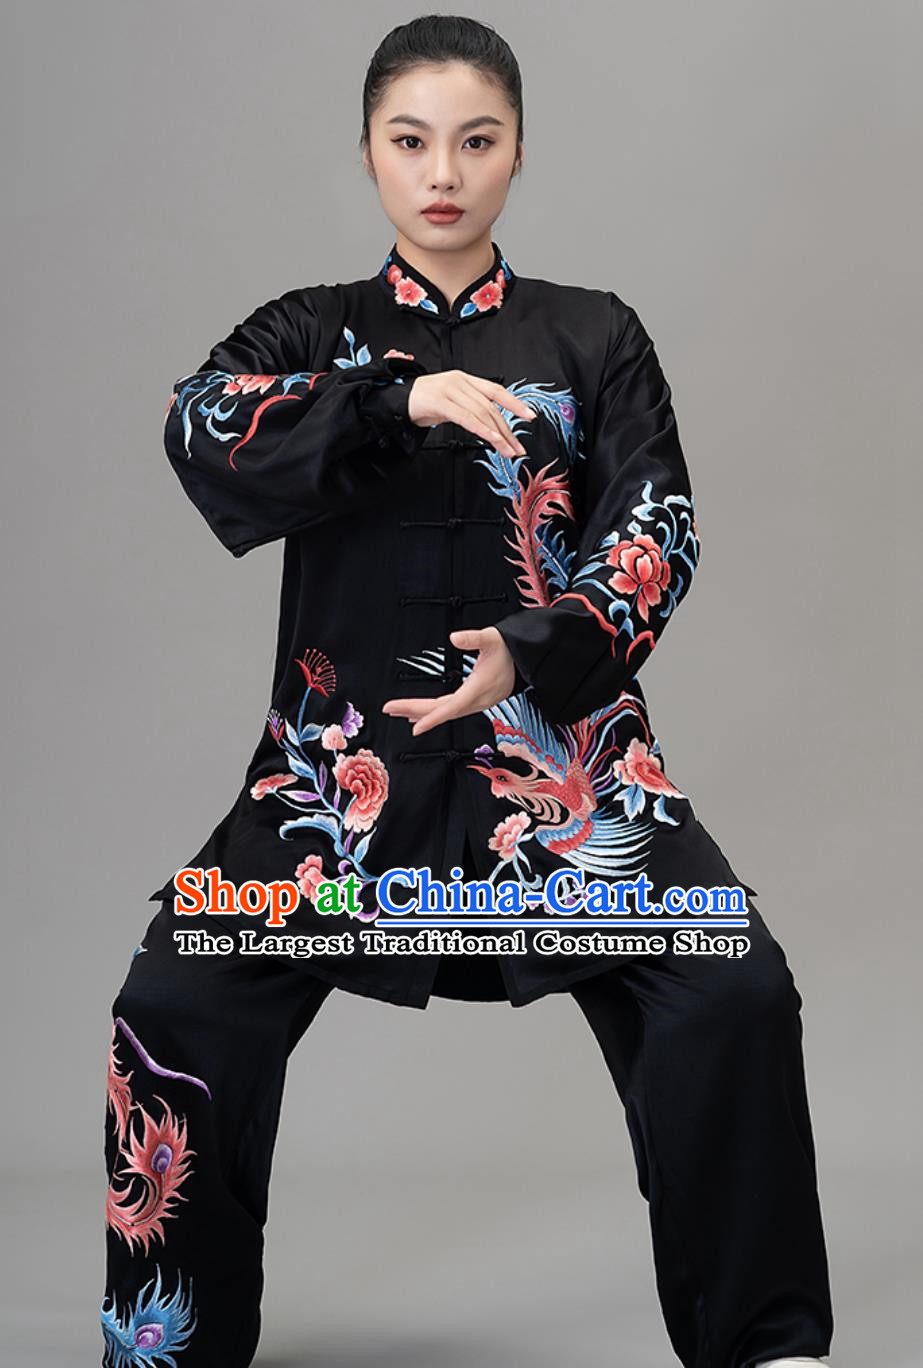 Silk Embroidered Phoenix Competition Performance Clothing New Tai Chi Suit Ba Duan Jin Suit Training Suit